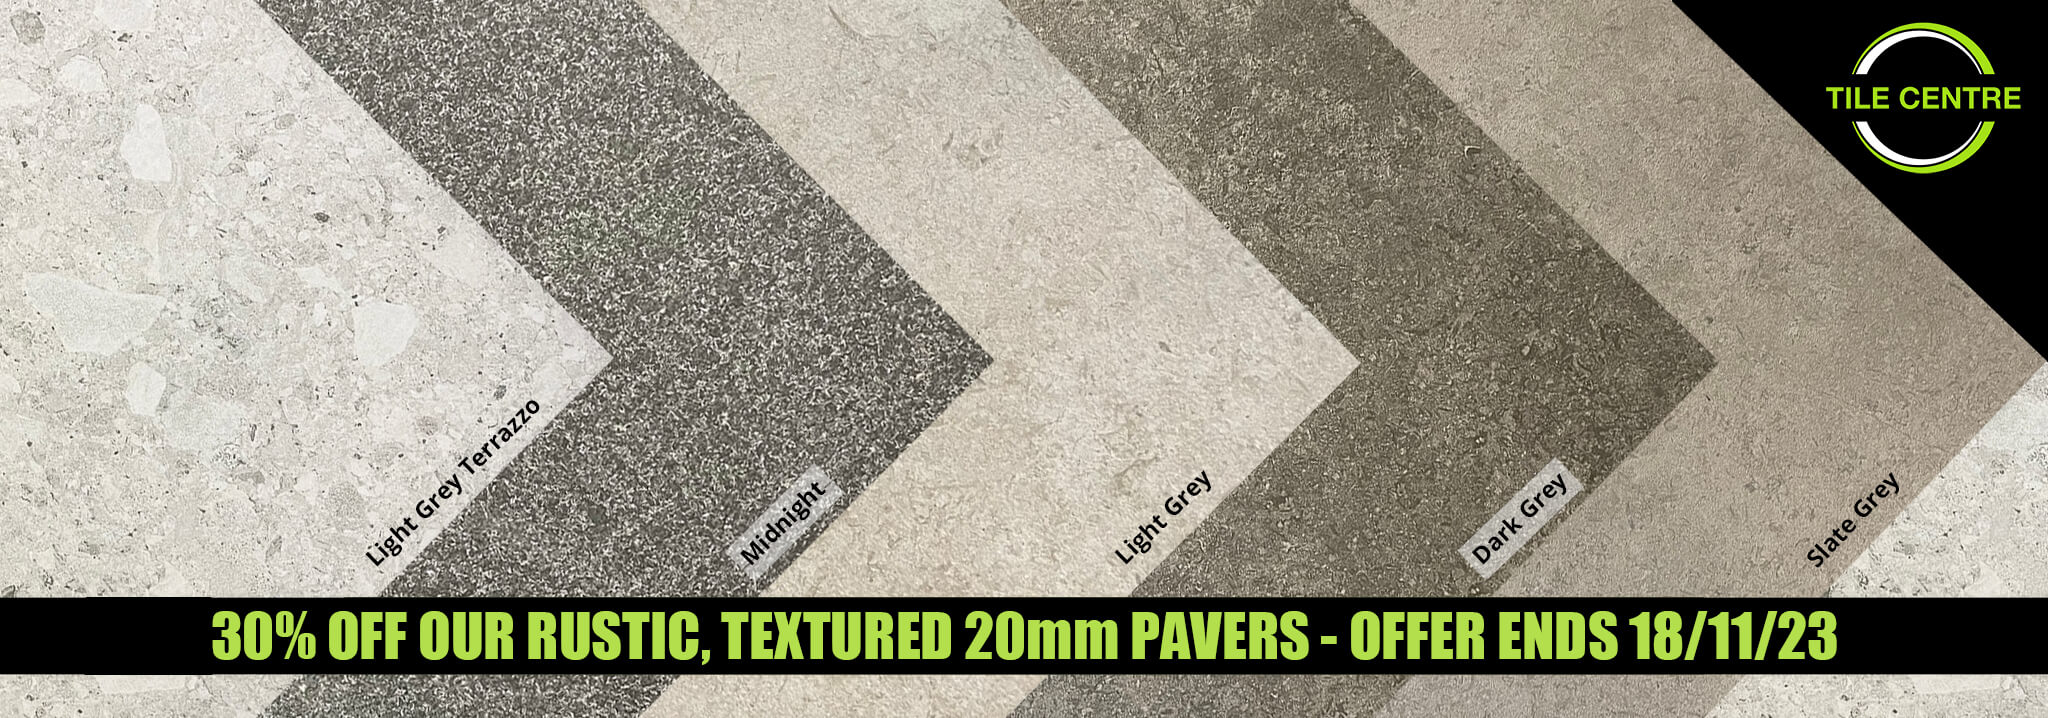 30% OFF Rustic Textured Pavers